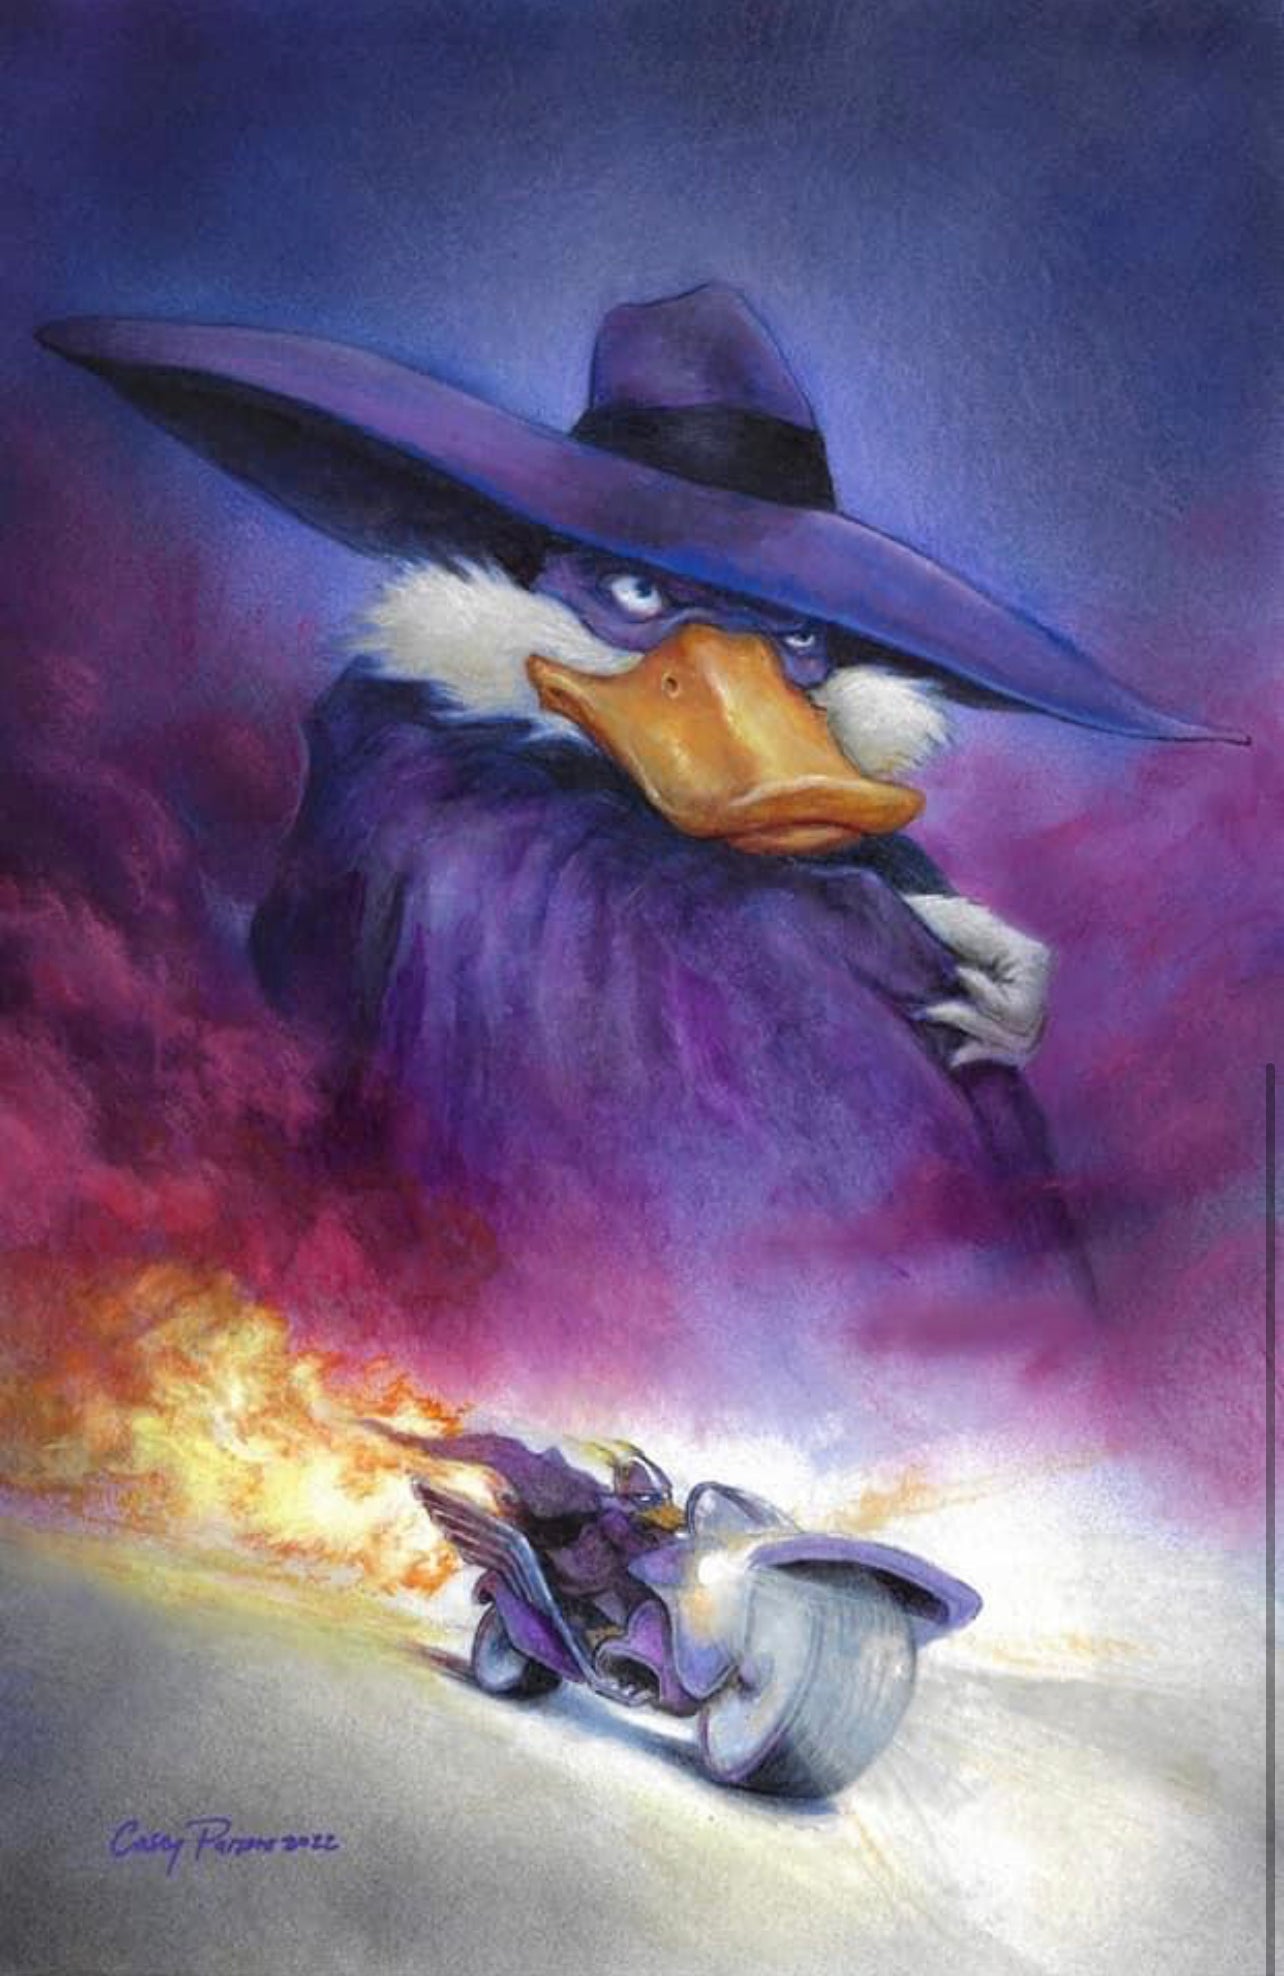 Darkwing Duck #1 Casey Parsons Cover - Preorder